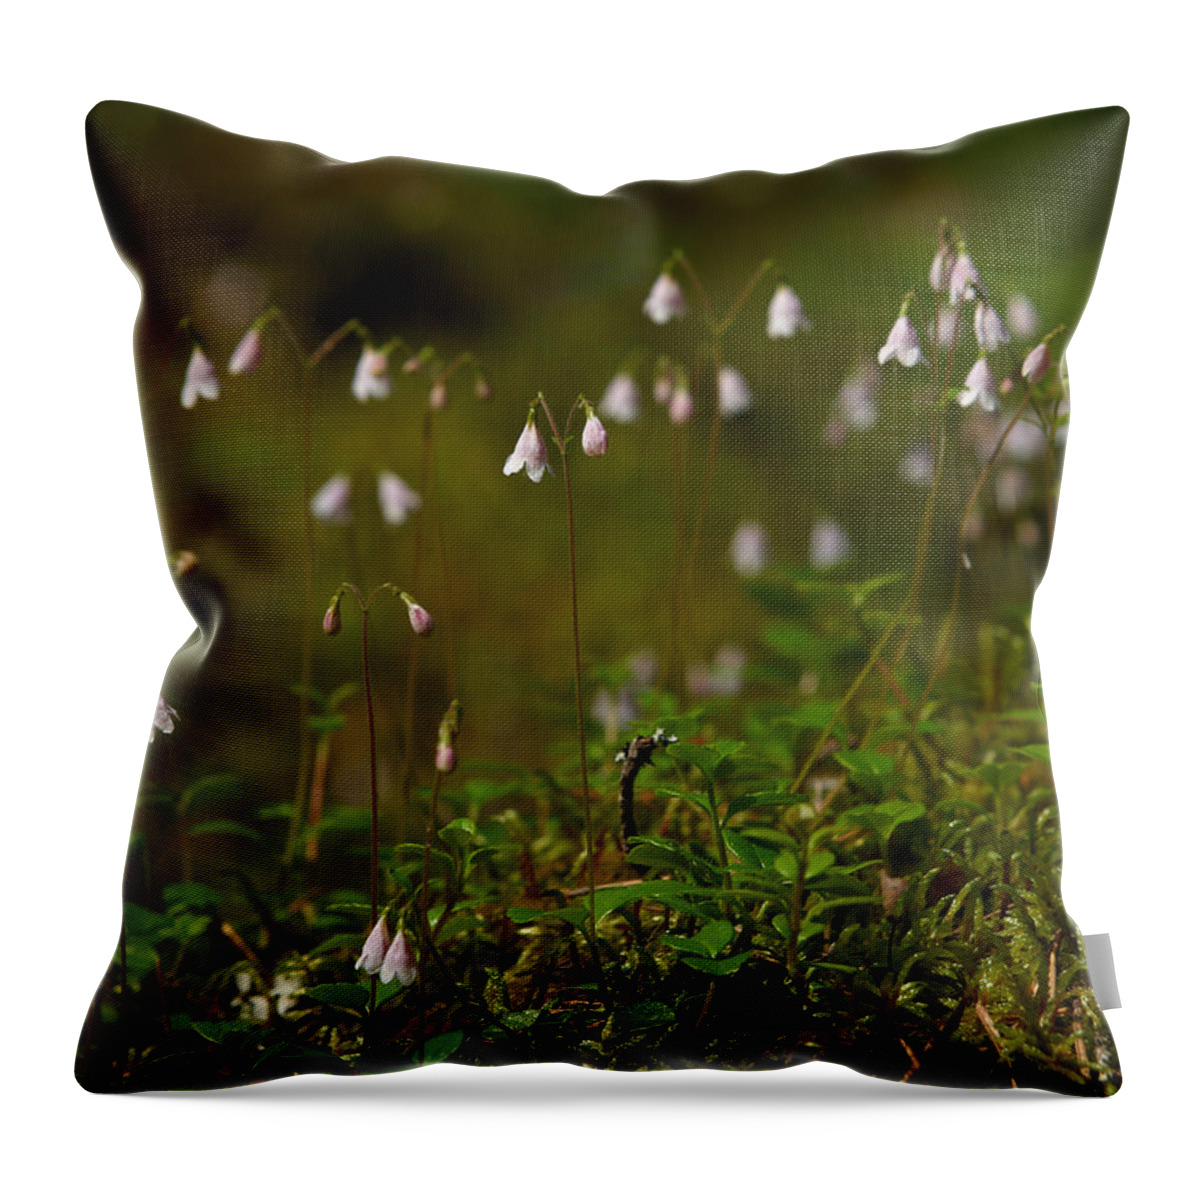 Helvetinjarvi National Park Throw Pillow featuring the photograph Twinflower by Jouko Lehto